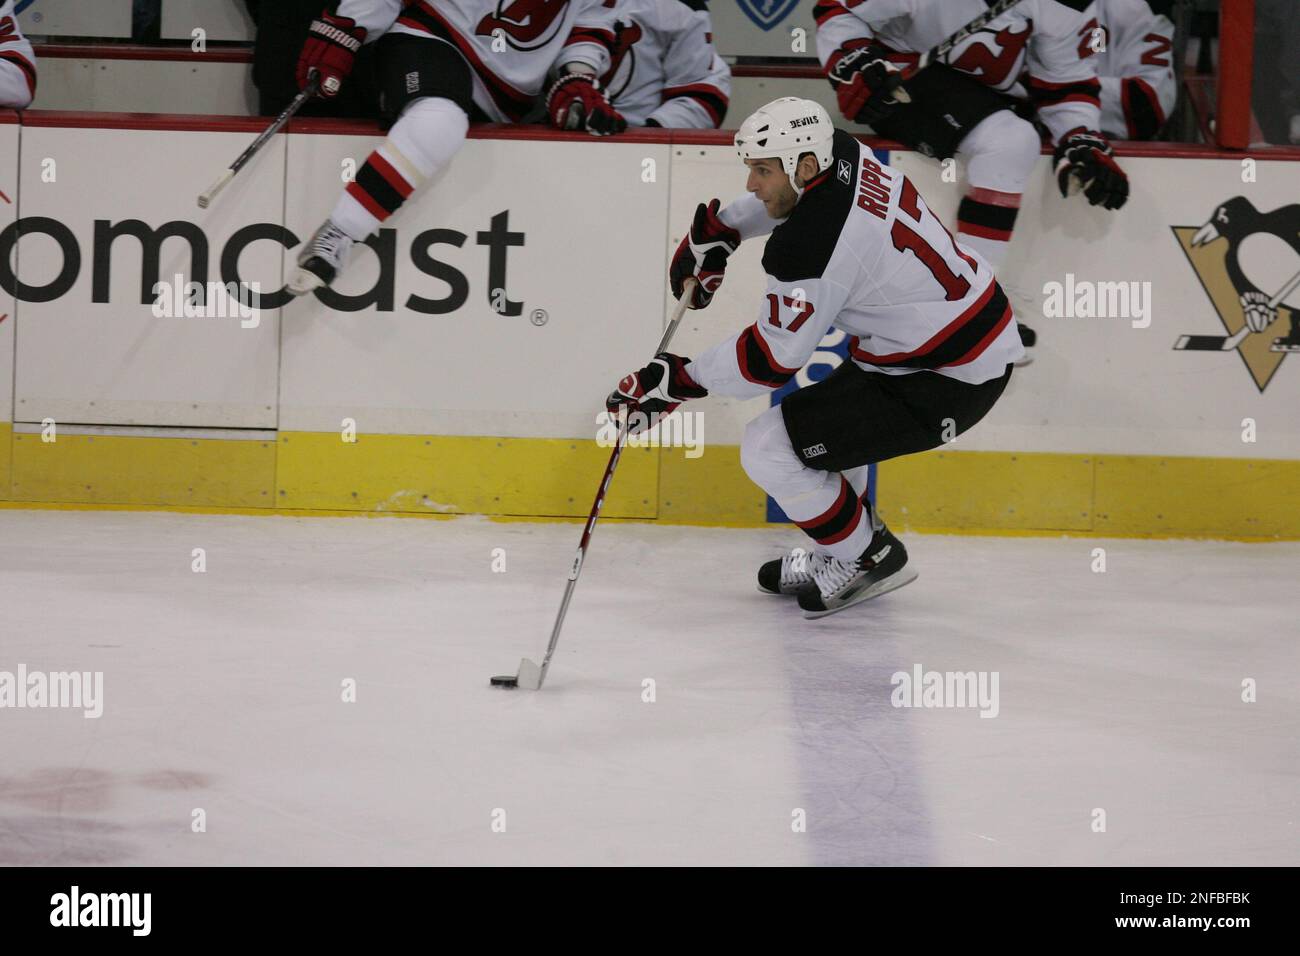 New Jersey Devils' Mike Rupp (17) reaches for the puck in front of